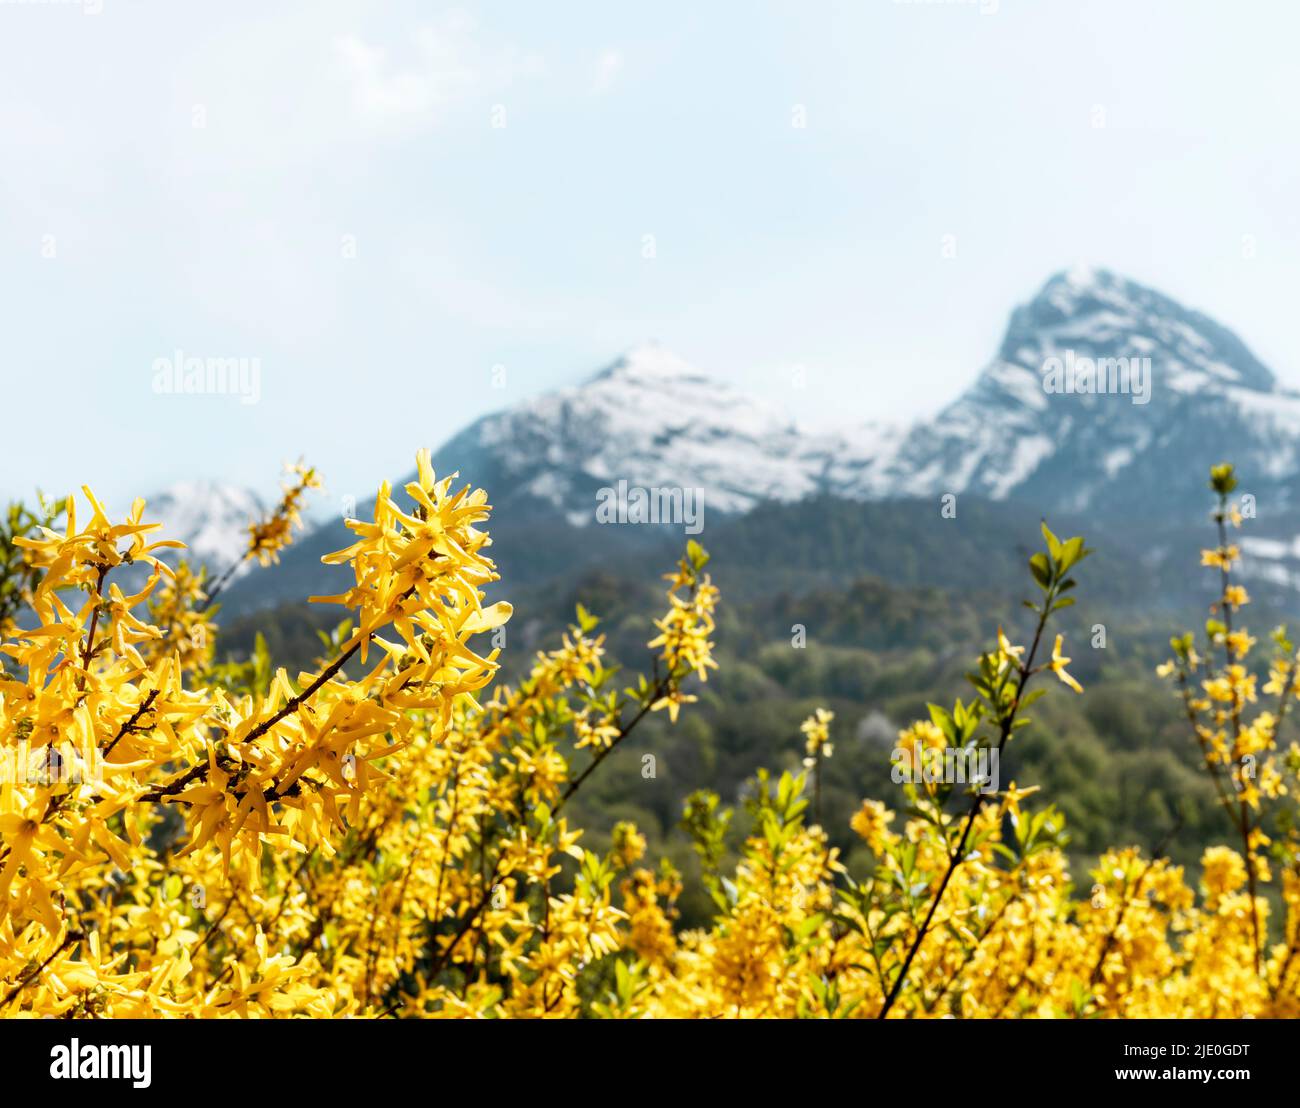 spring or summer landscape flowering plant with yellow forsythia flowers against snow capped mountain peaks and blue sky beauty in nature Stock Photo